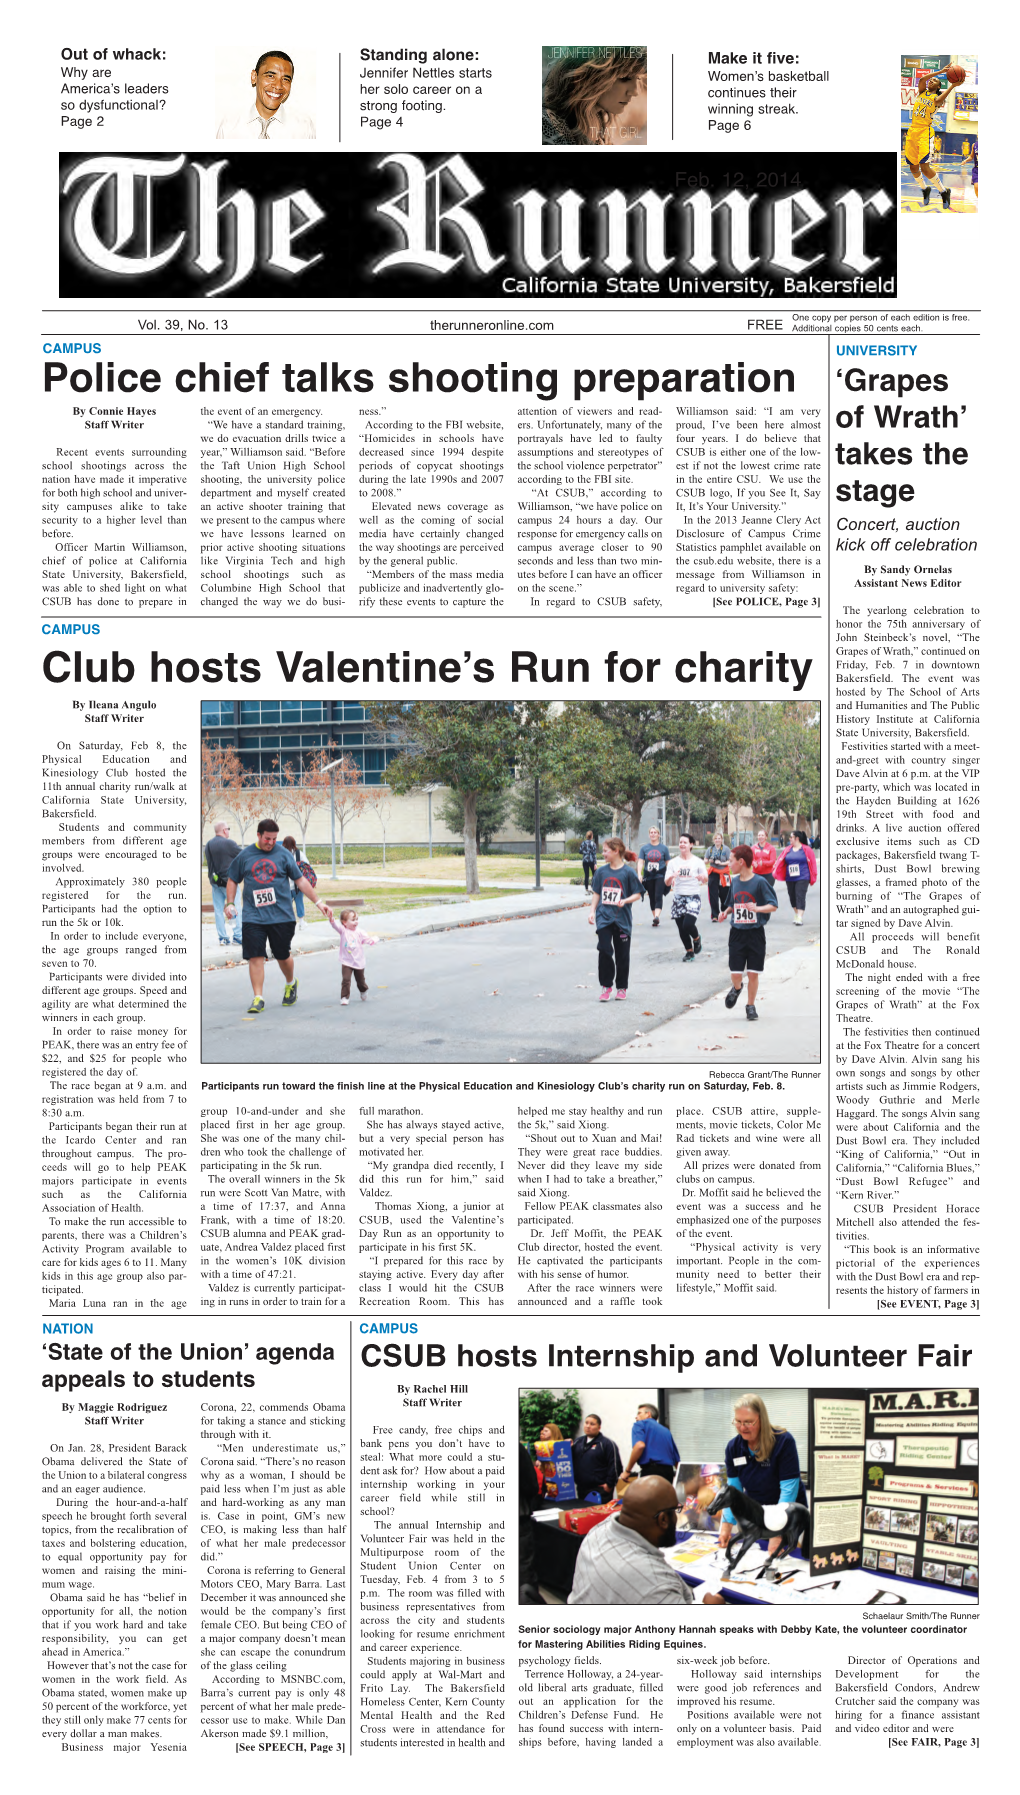 Club Hosts Valentine's Run for Charity